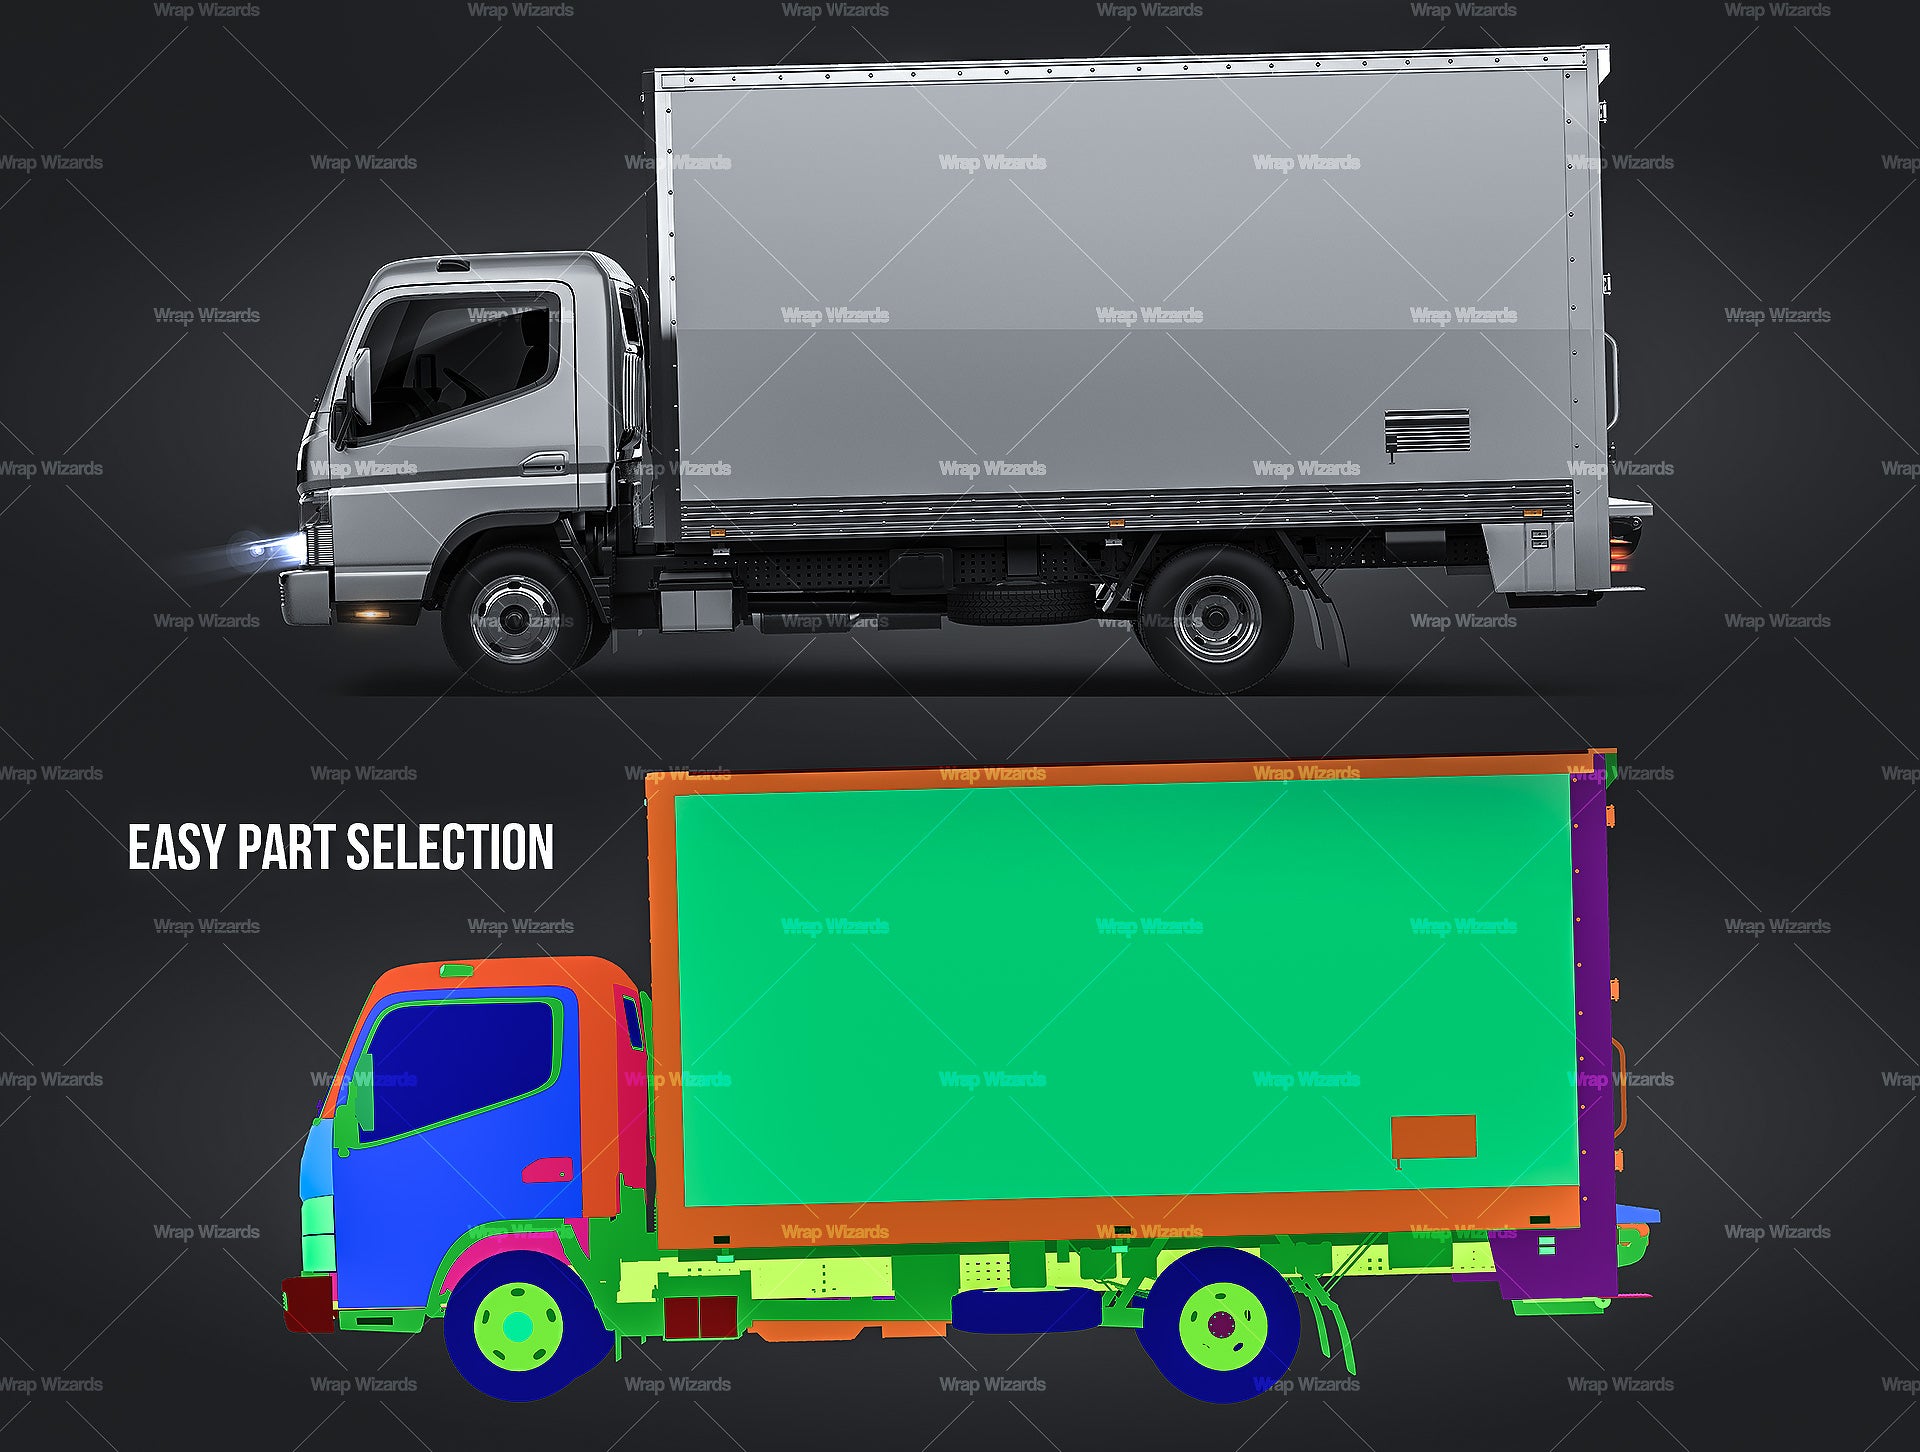 Mitsubishi Fuso Canter 515 Wide Single Cab Pantech Truck glossy finish - all sides Car Mockup Template.psd